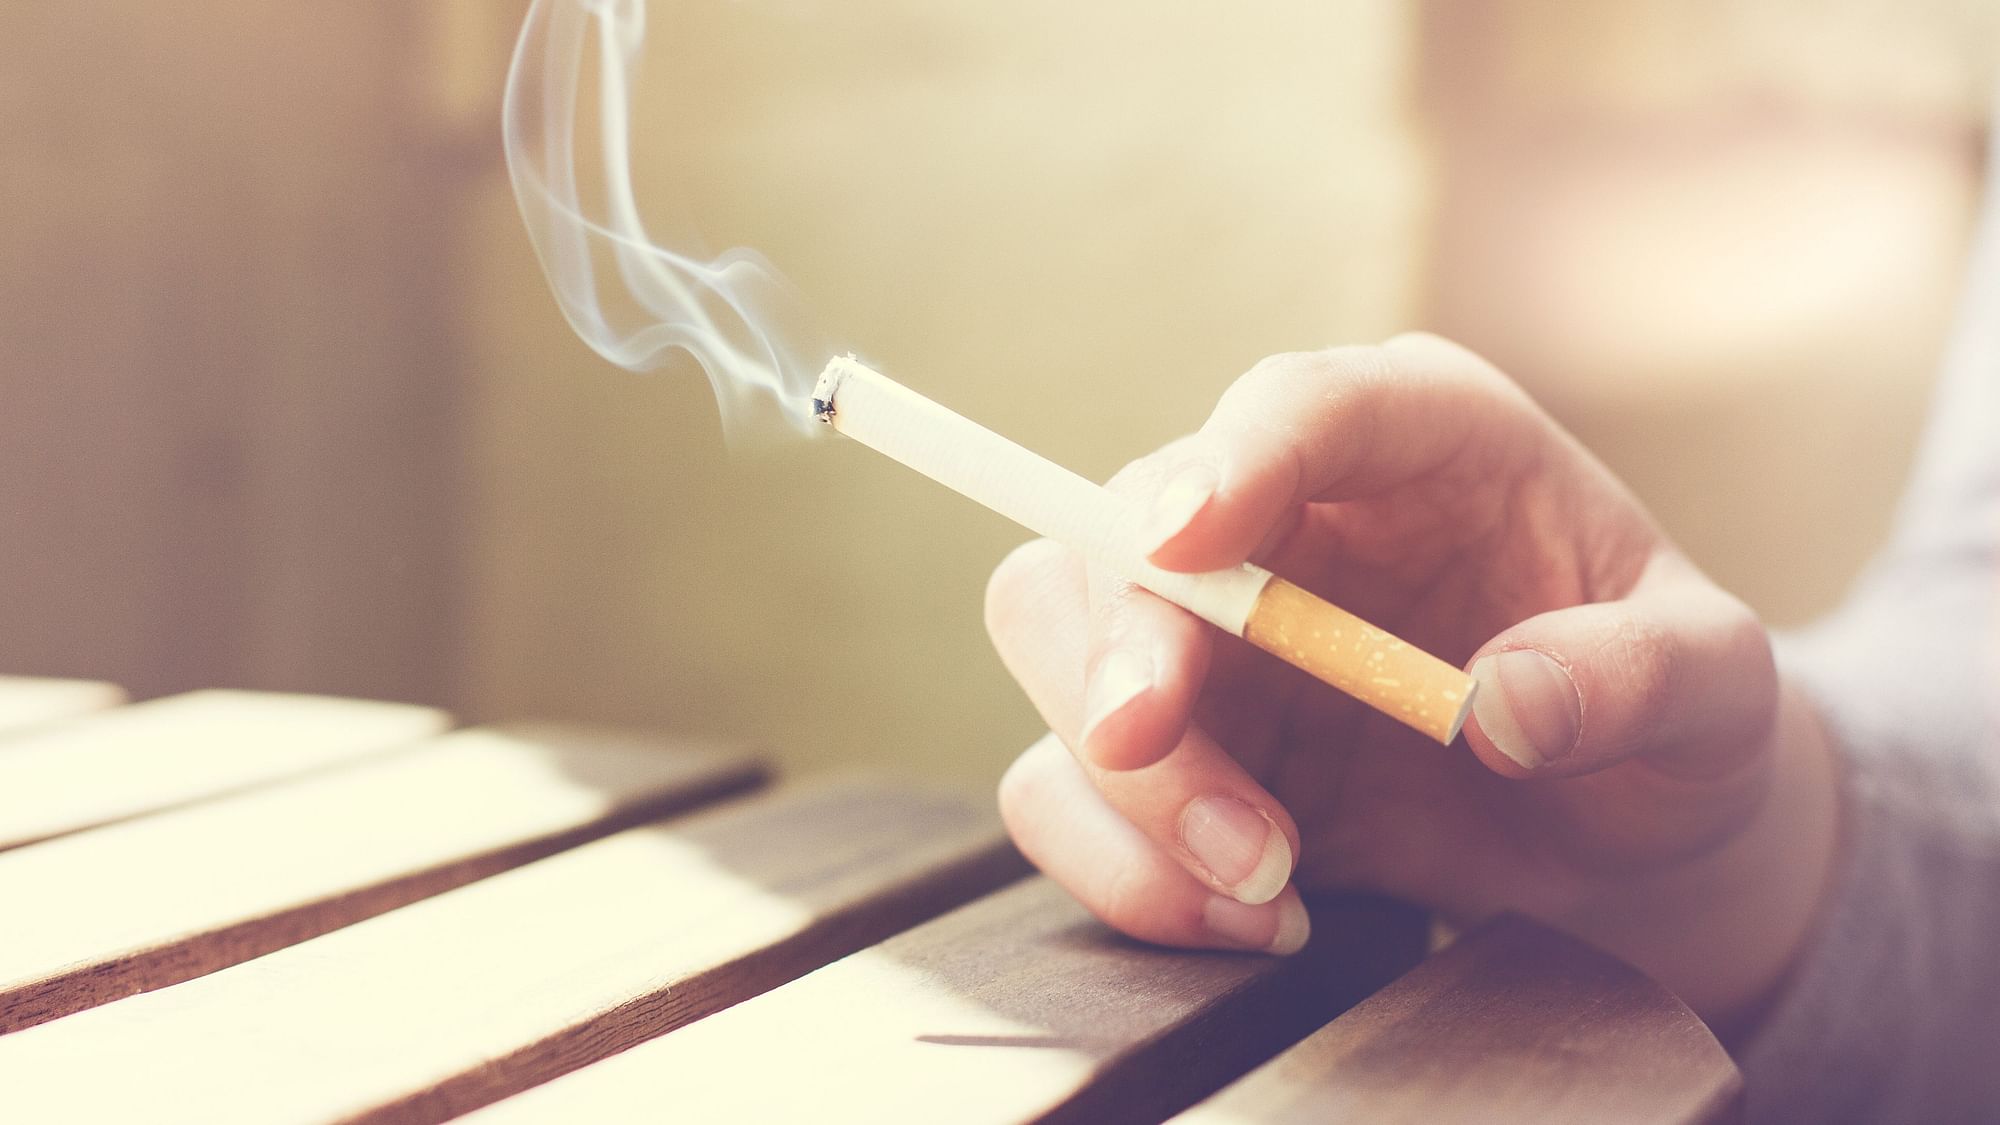 Heavy smoking causes faces to look older, says study